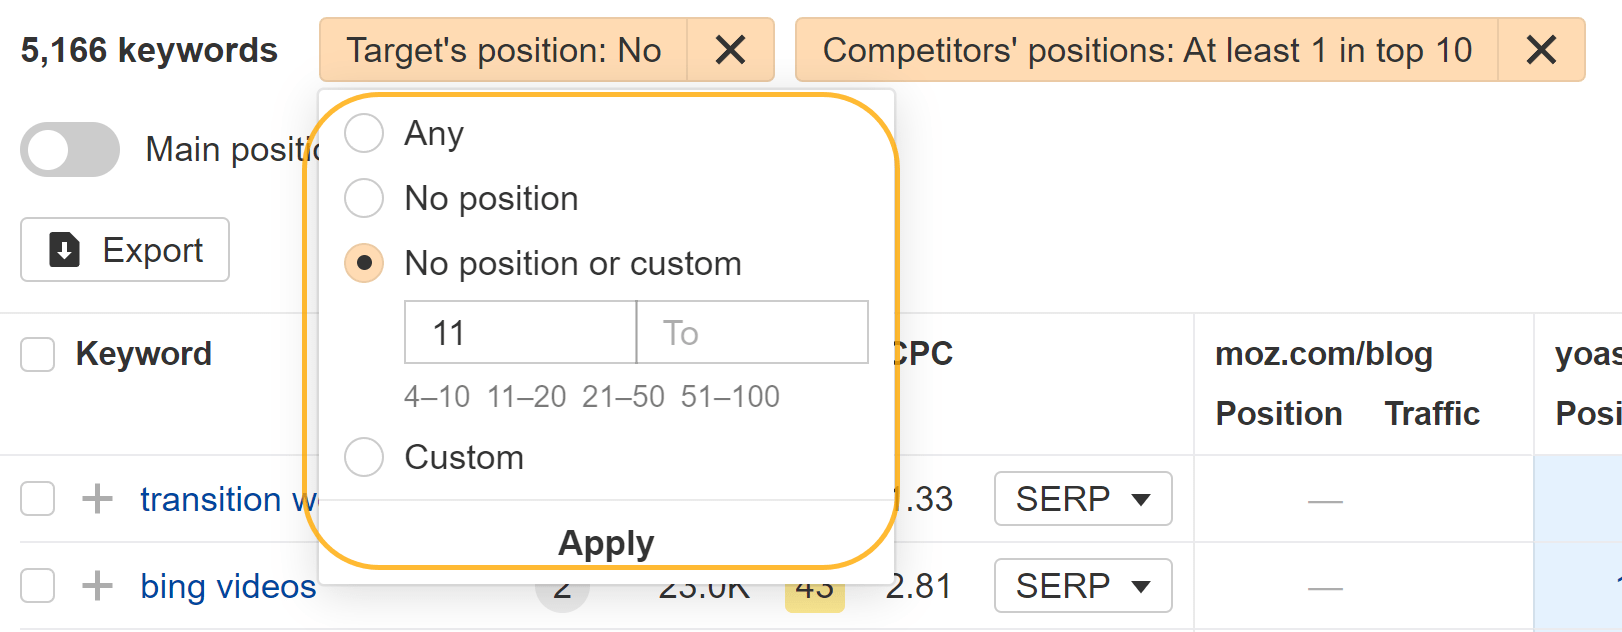 Applying filters in Ahrefs' Competitive Analysis tool
